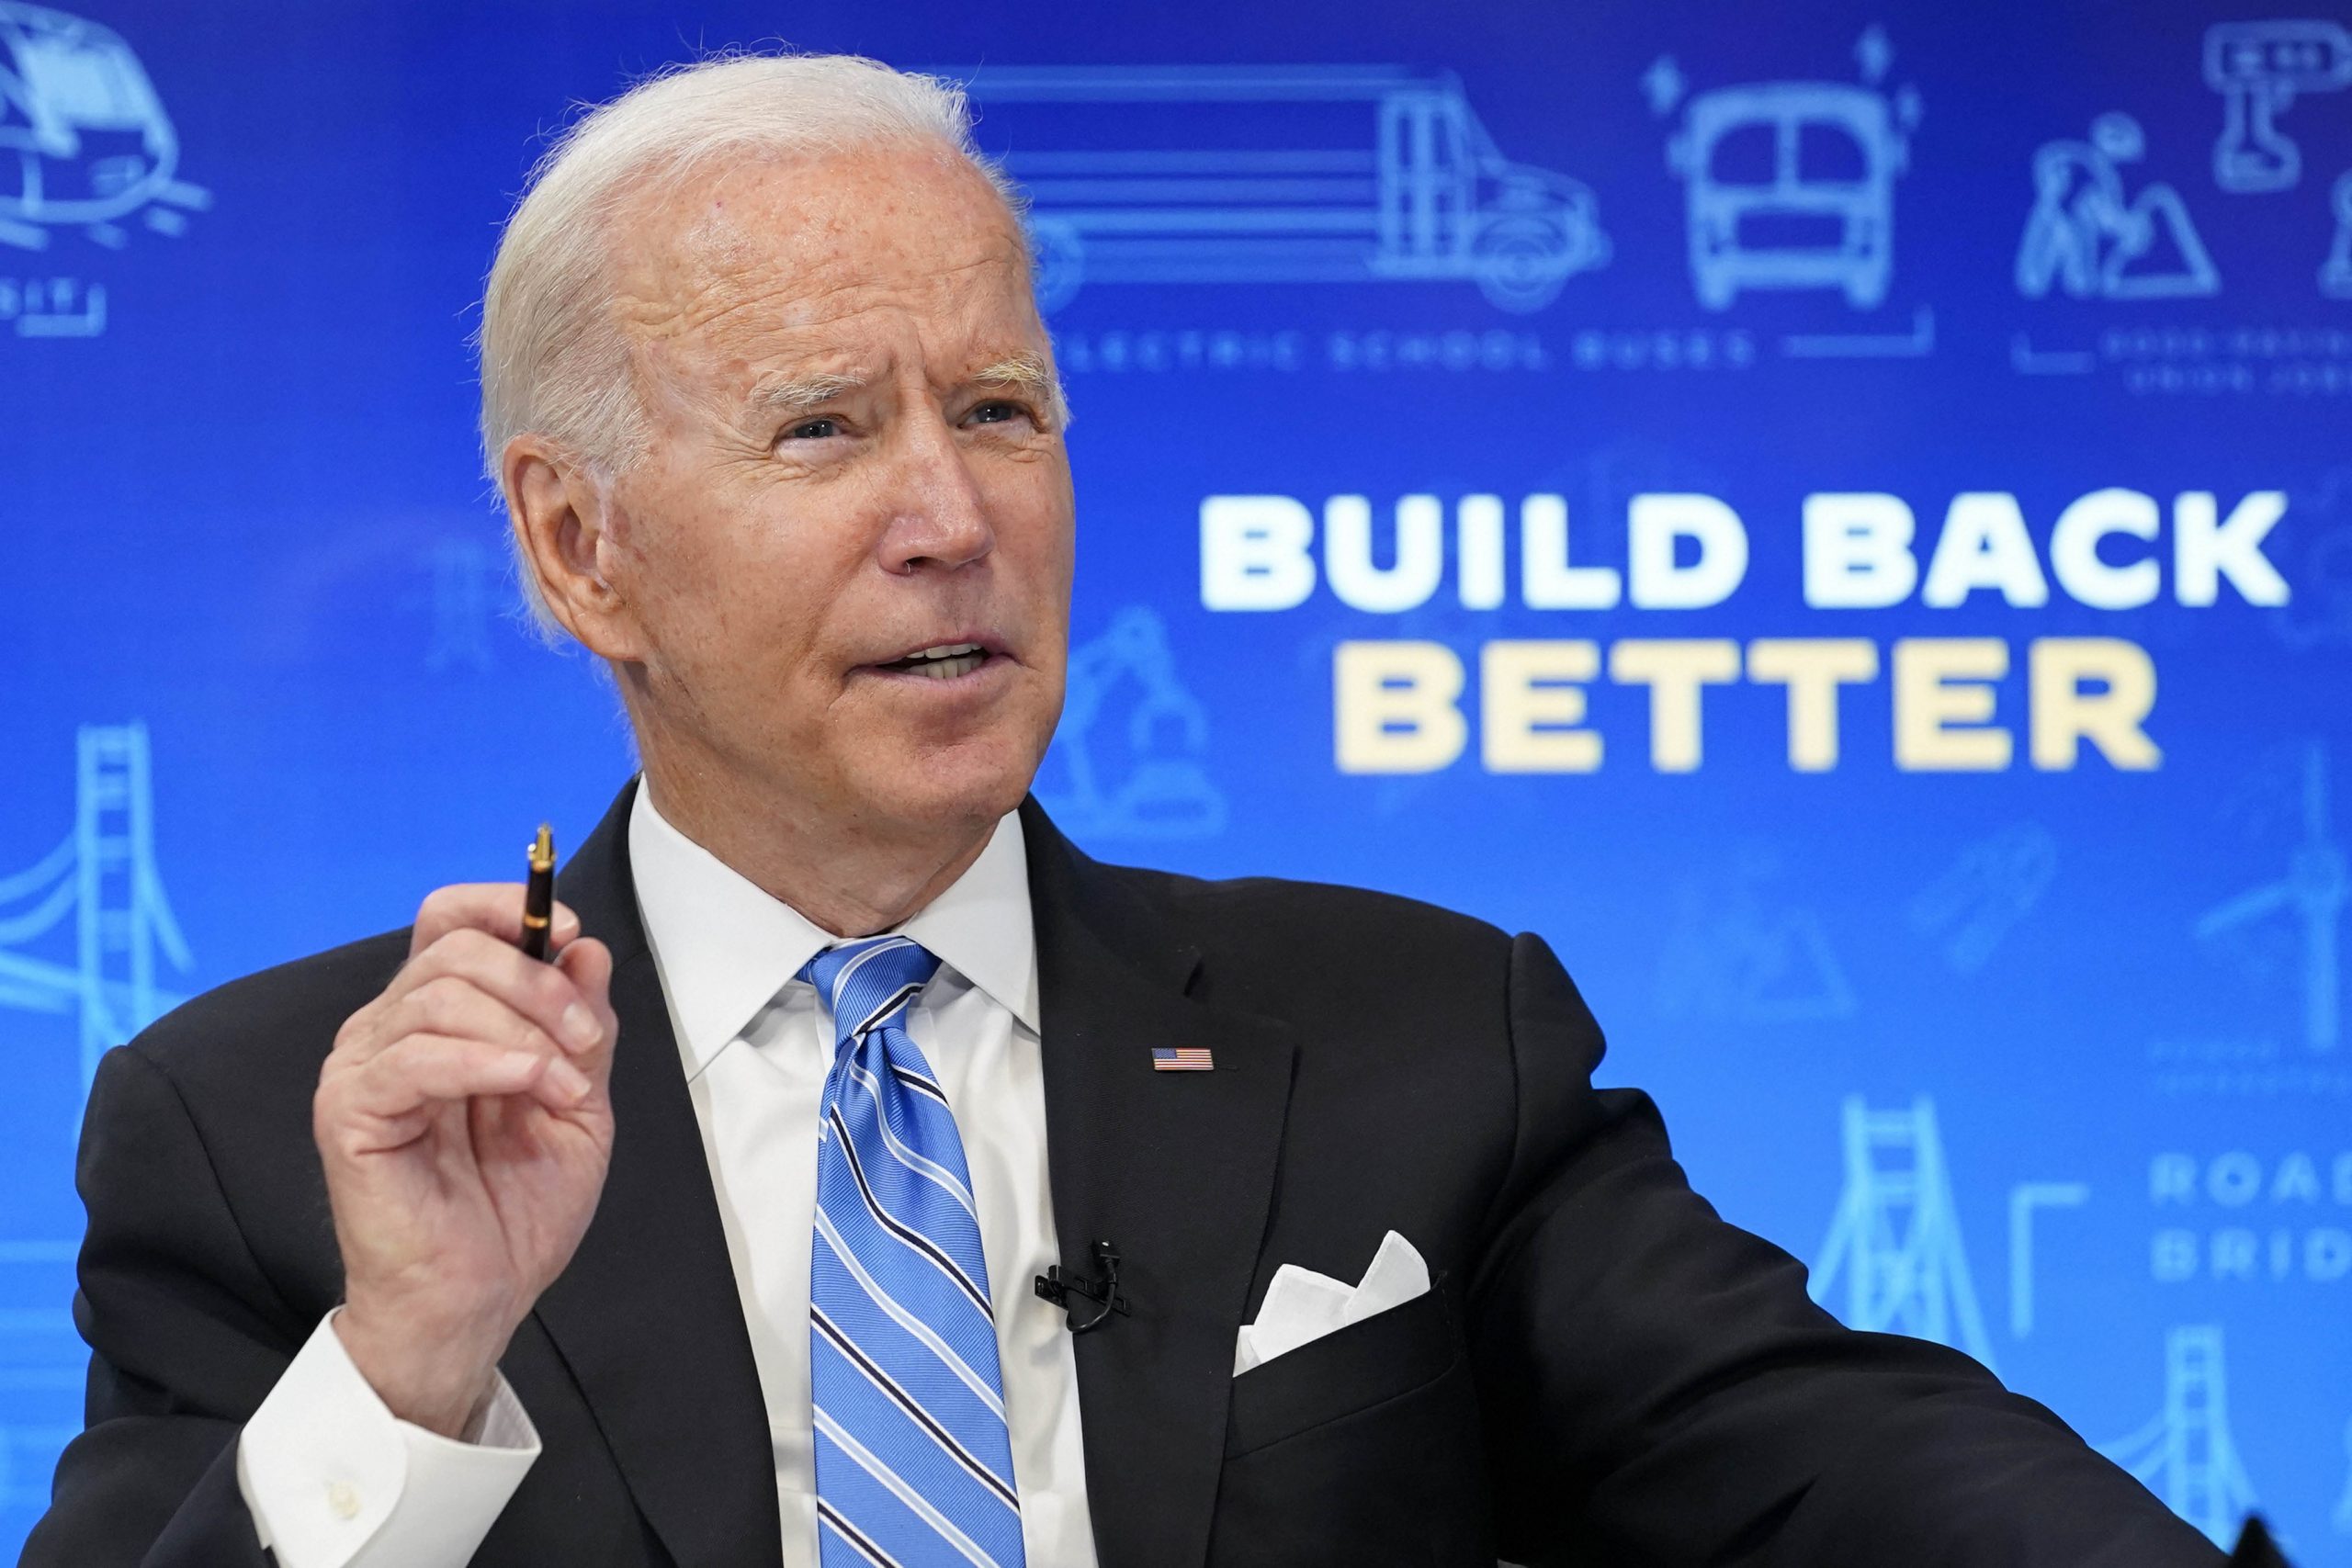 Joe Biden eyes tougher vaccine rules without provoking backlash